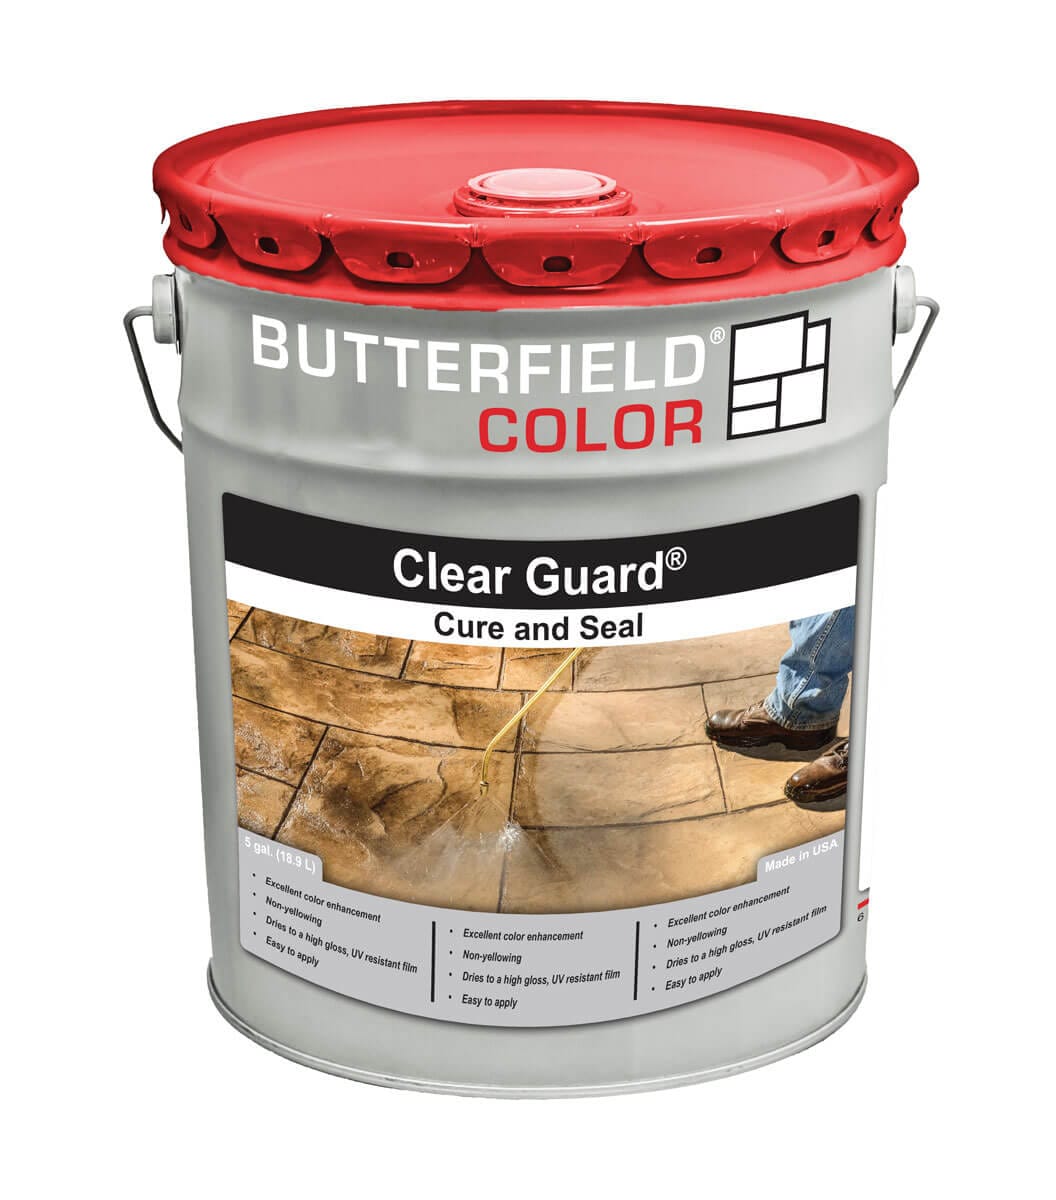 Butterfield Color Clear Guard First Seal - Xtreme Polishing Systems - concrete sealers, concrete floor sealers, floor sealers